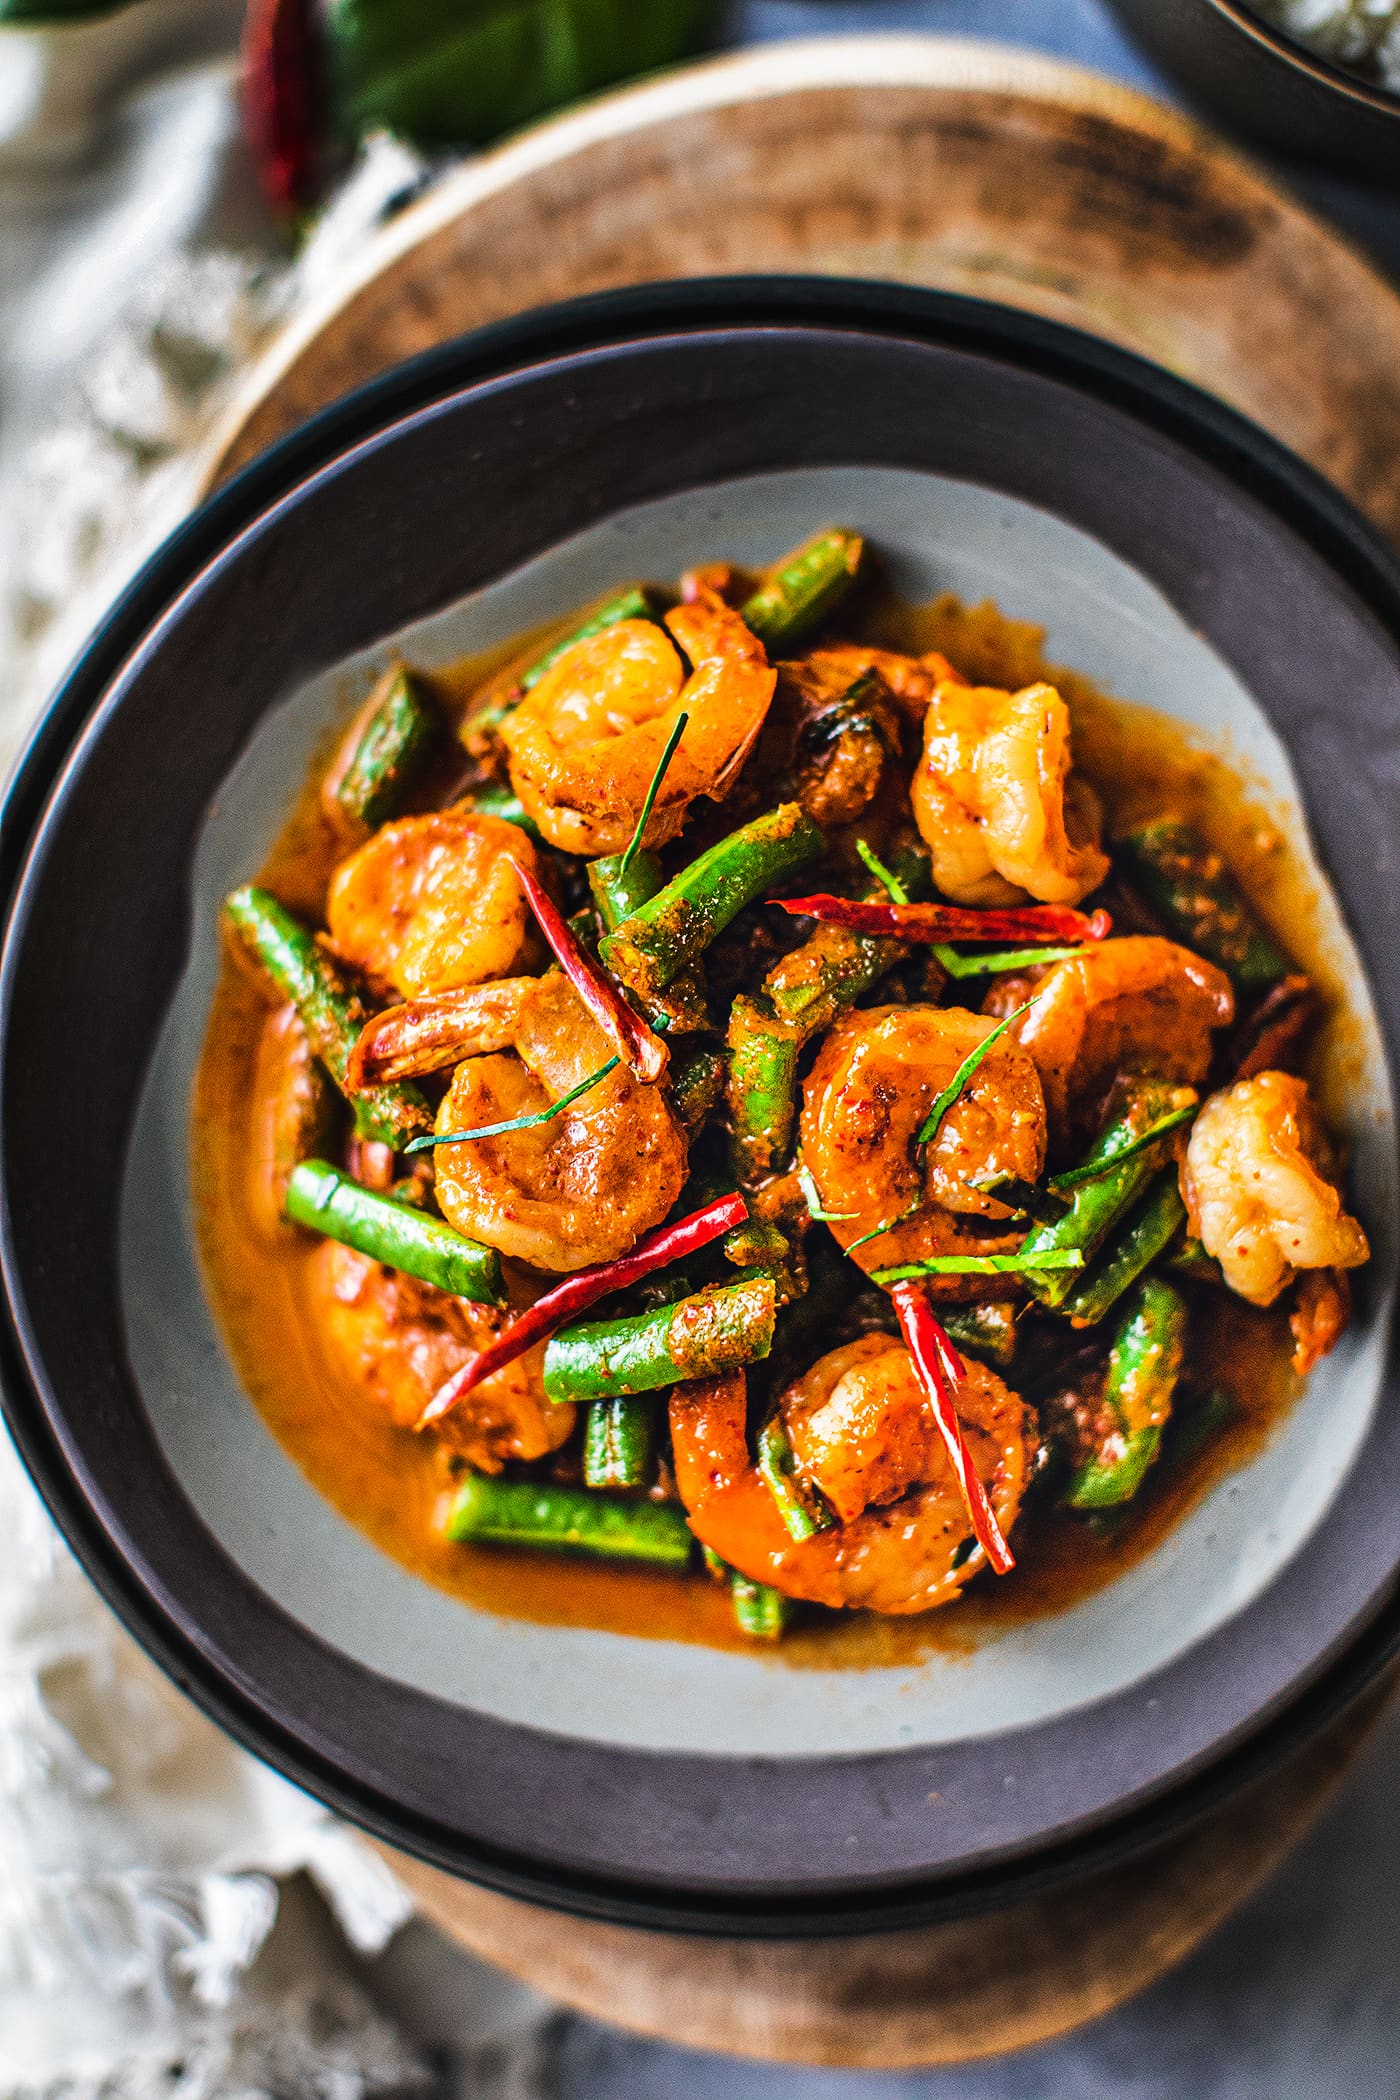 stir fried green beans and shrimp on a plate.